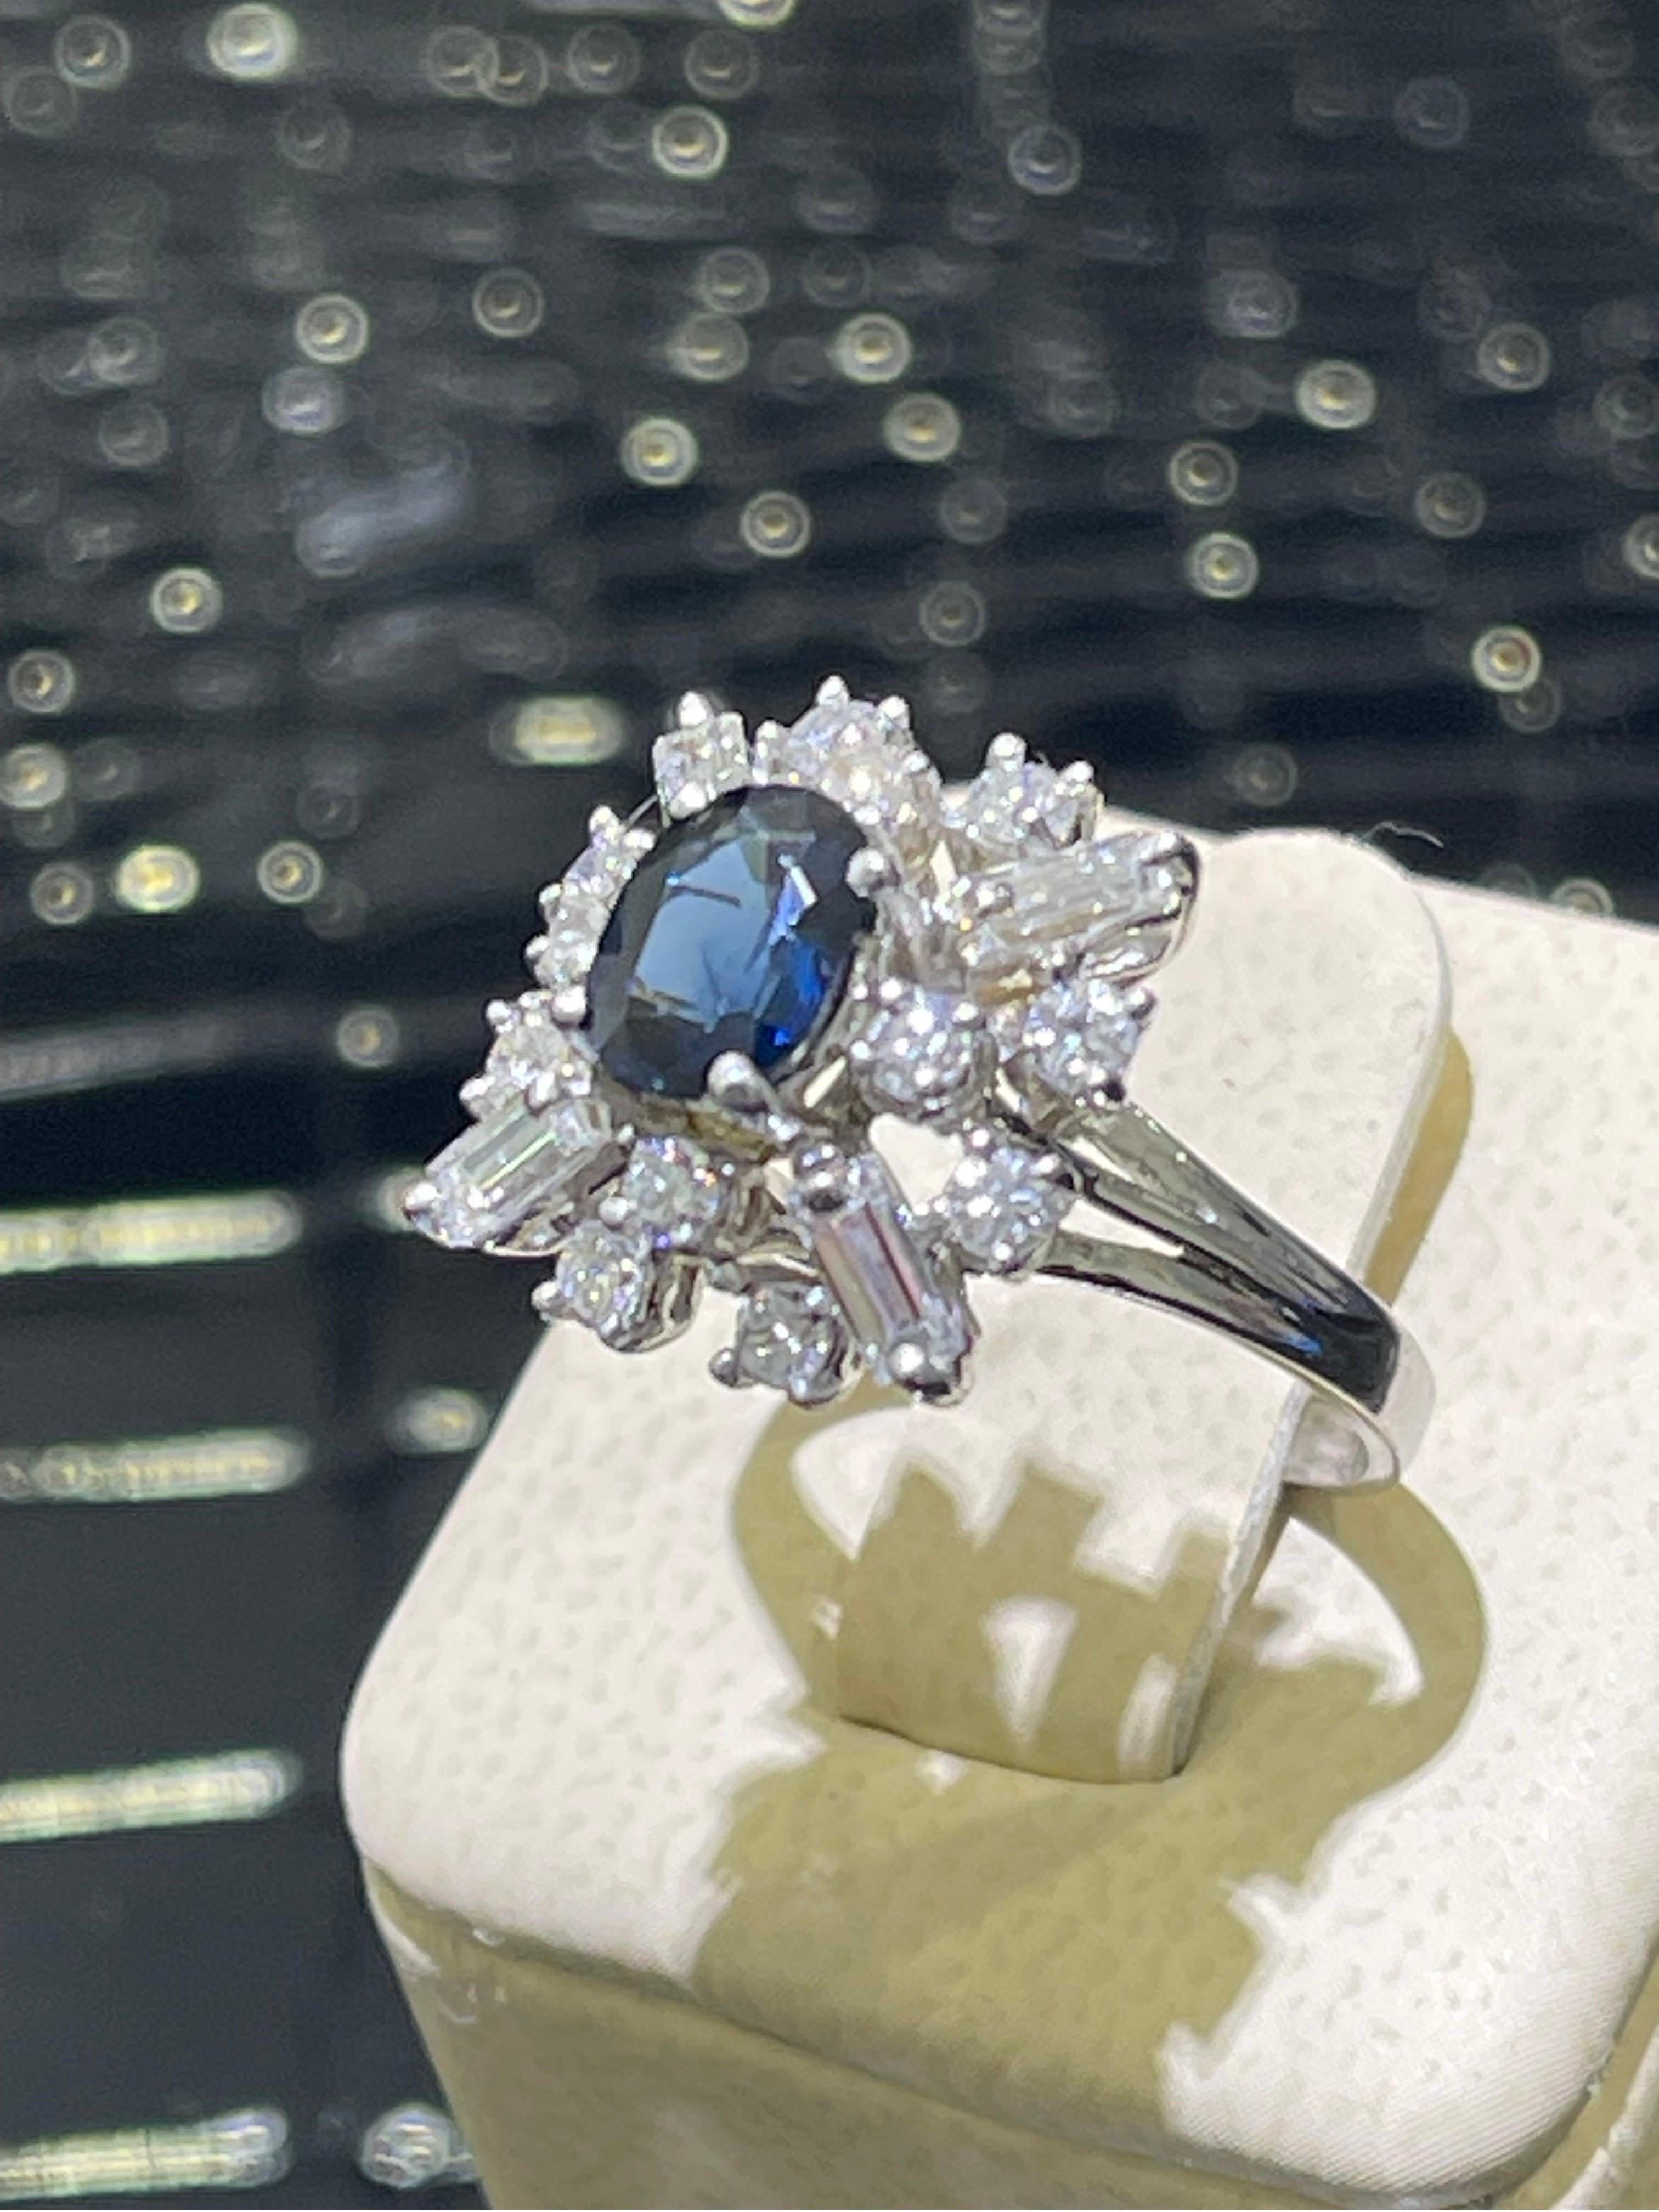 Elegant Sapphire & Diamond Ring In 14k White Gold.

Over 1 carat in round and baguette diamonds.

Size 6.5